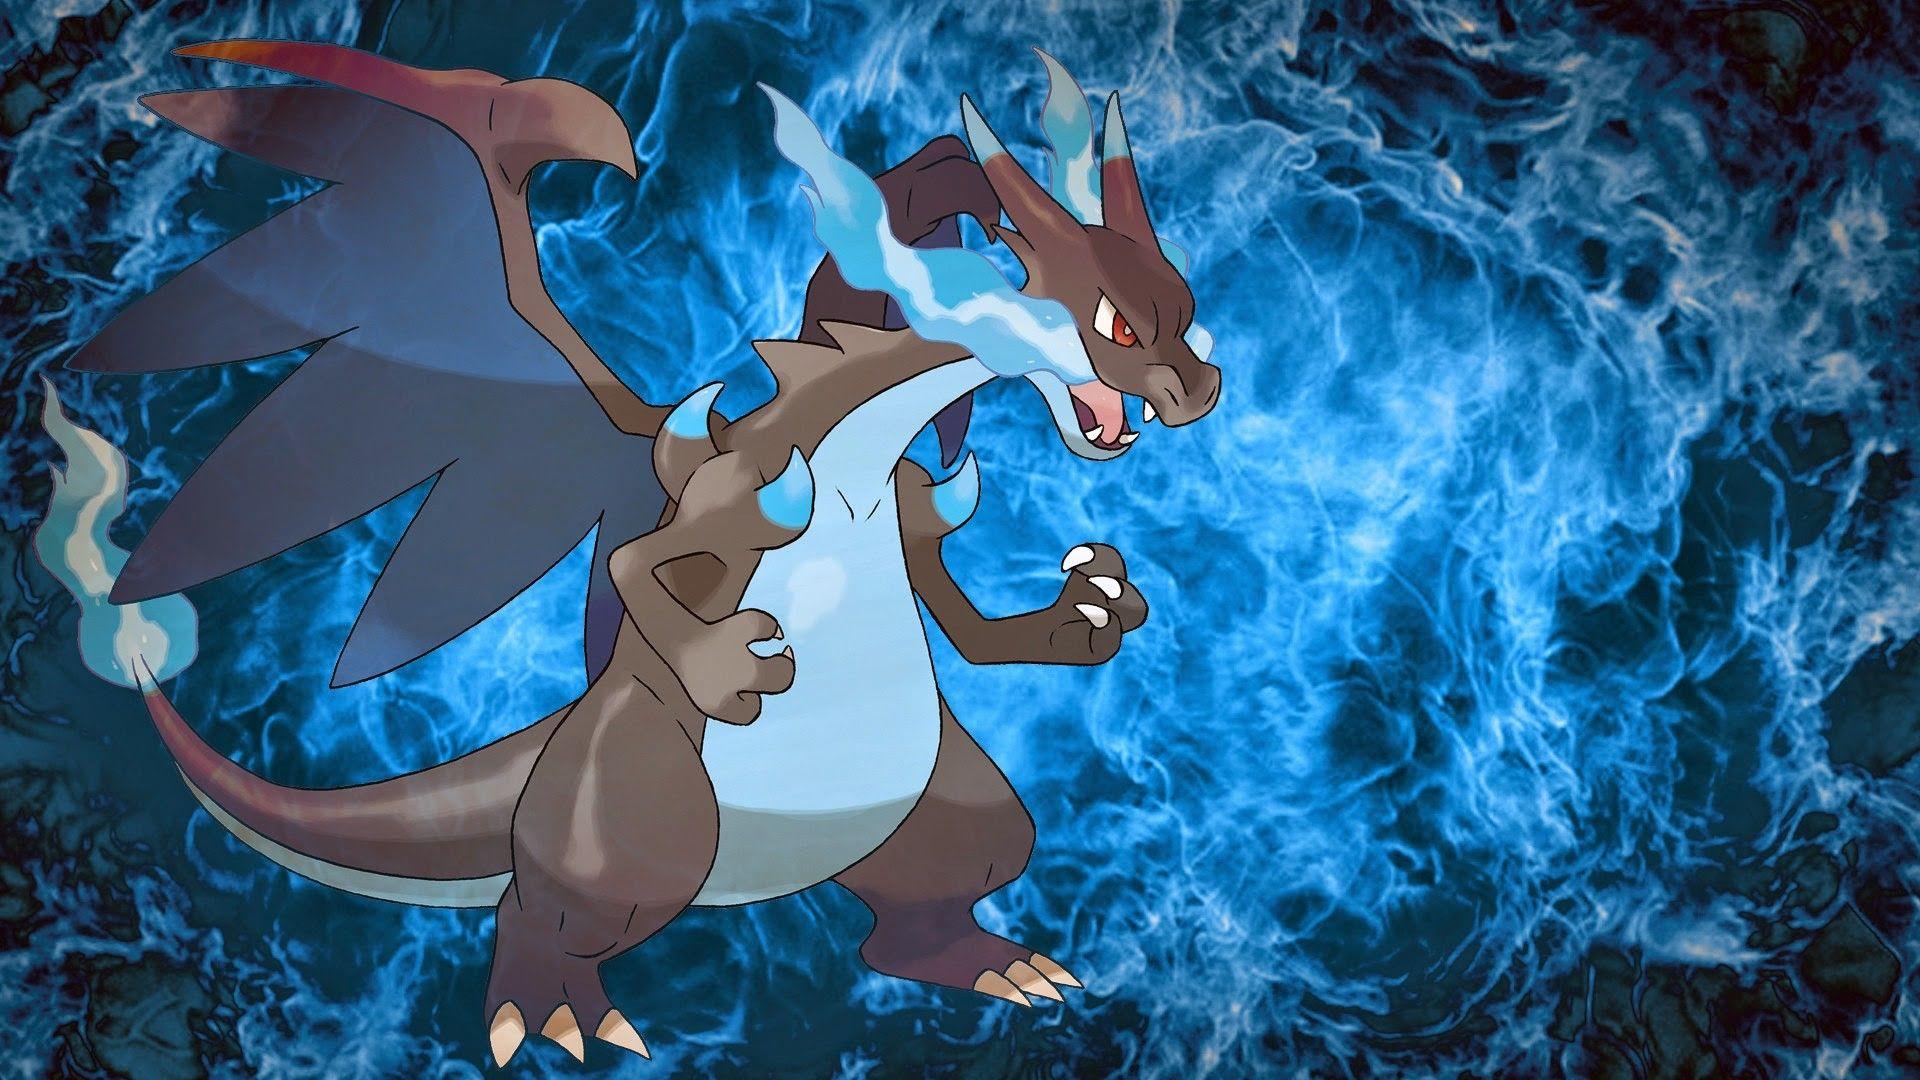 welcome-toad952: mega charizard x y fight cute pokemon